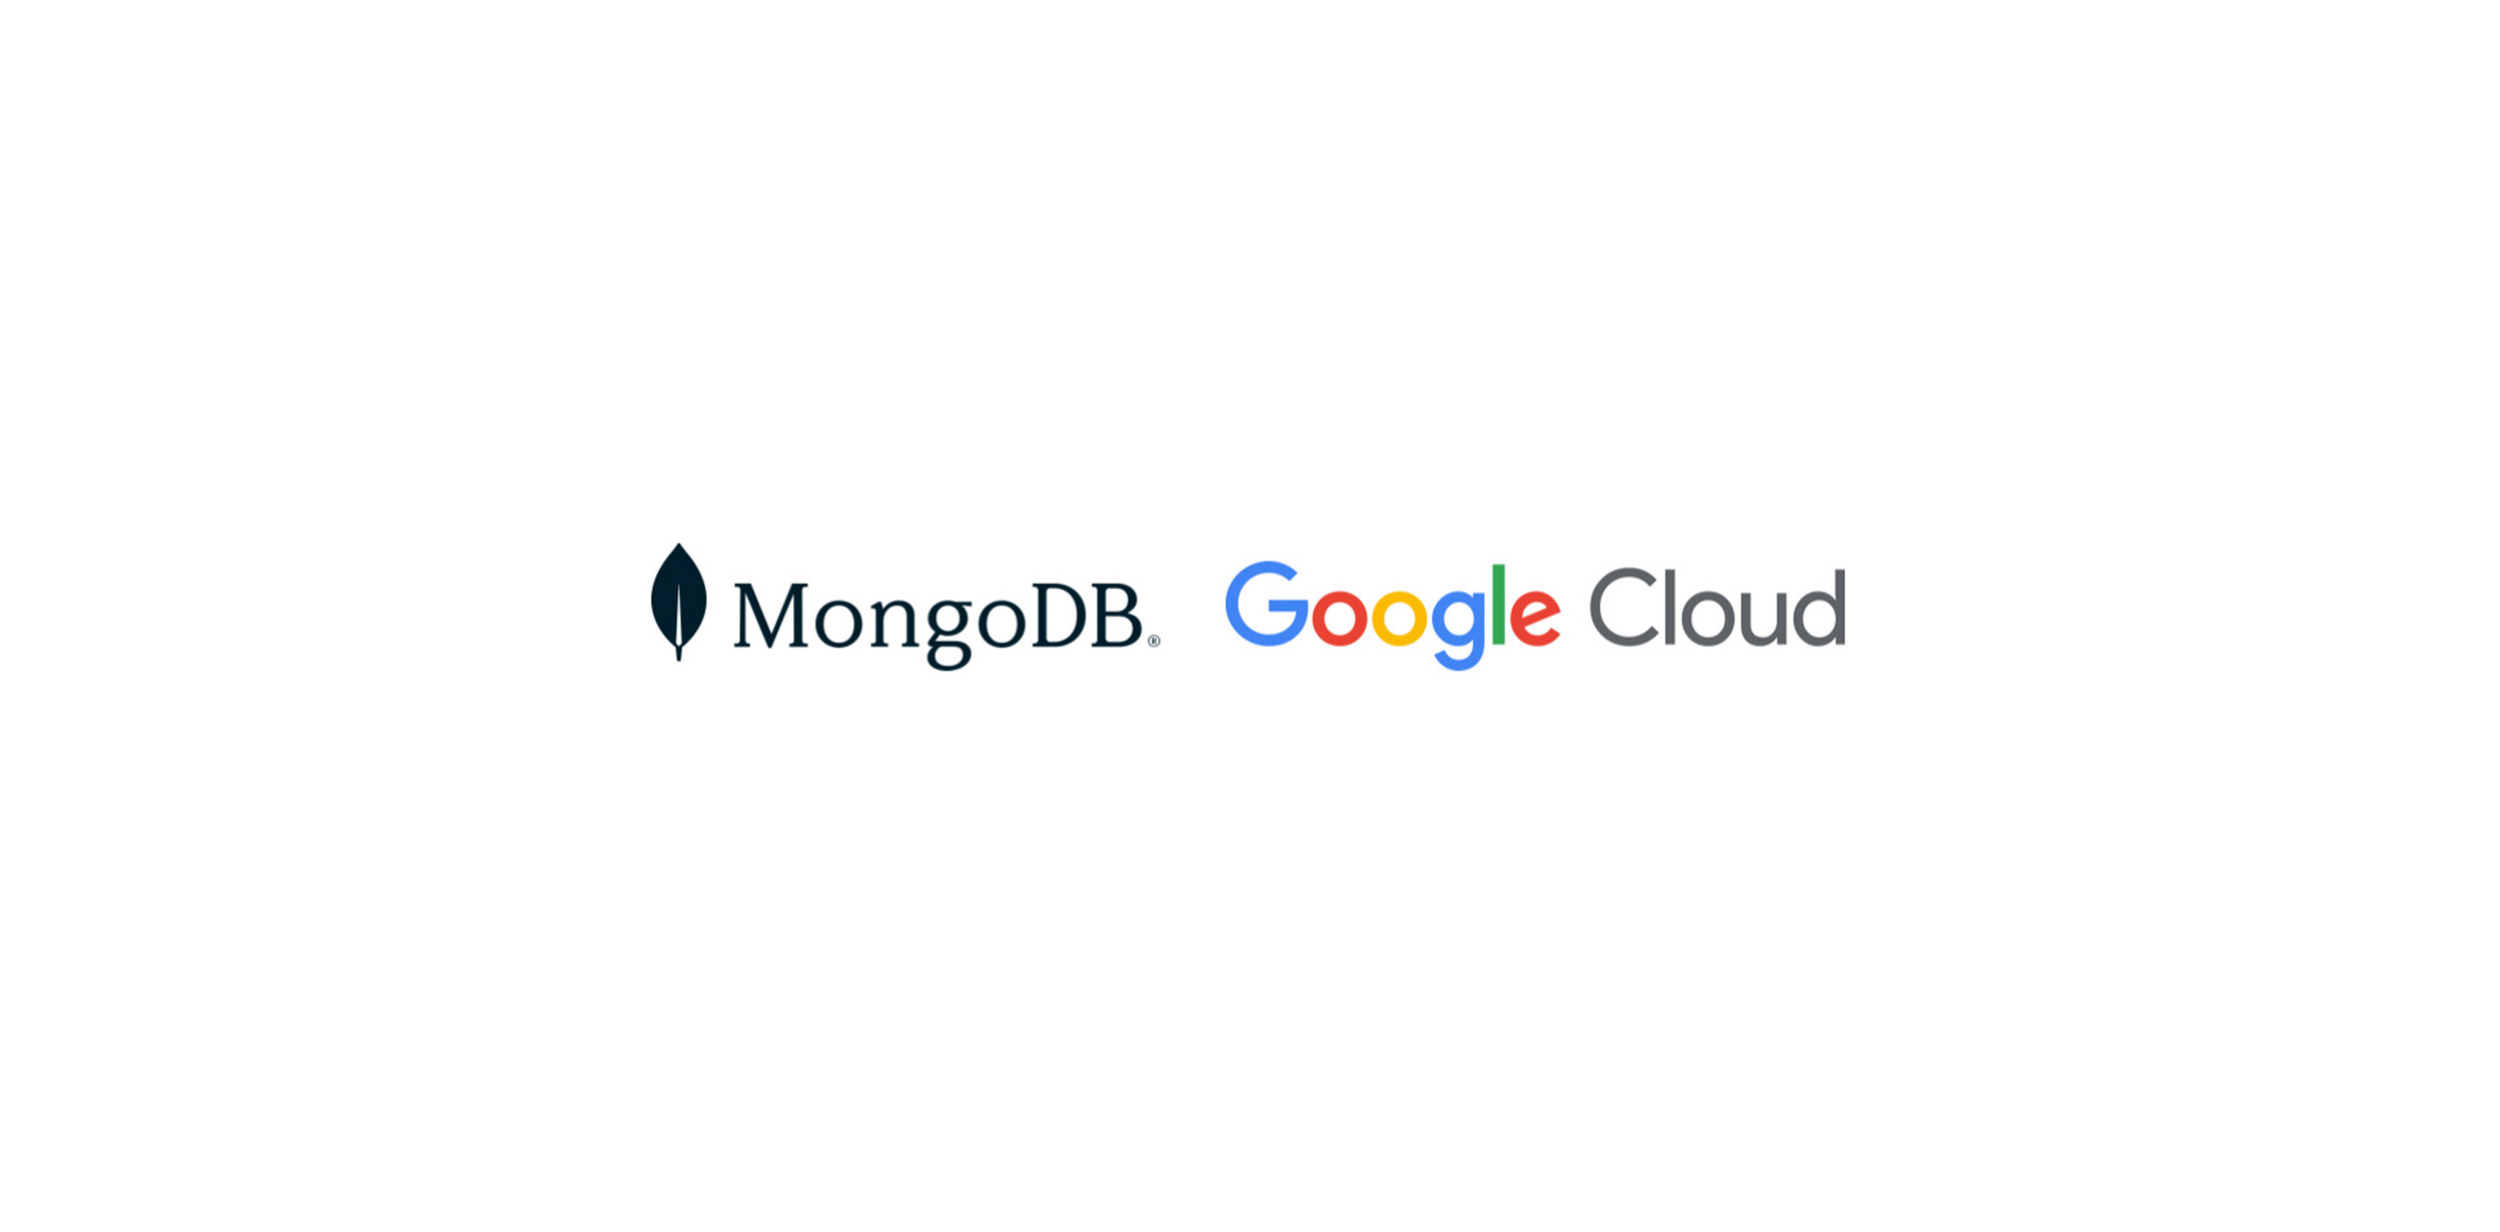 Google Cloud and MongoDB expand partnership to support startups